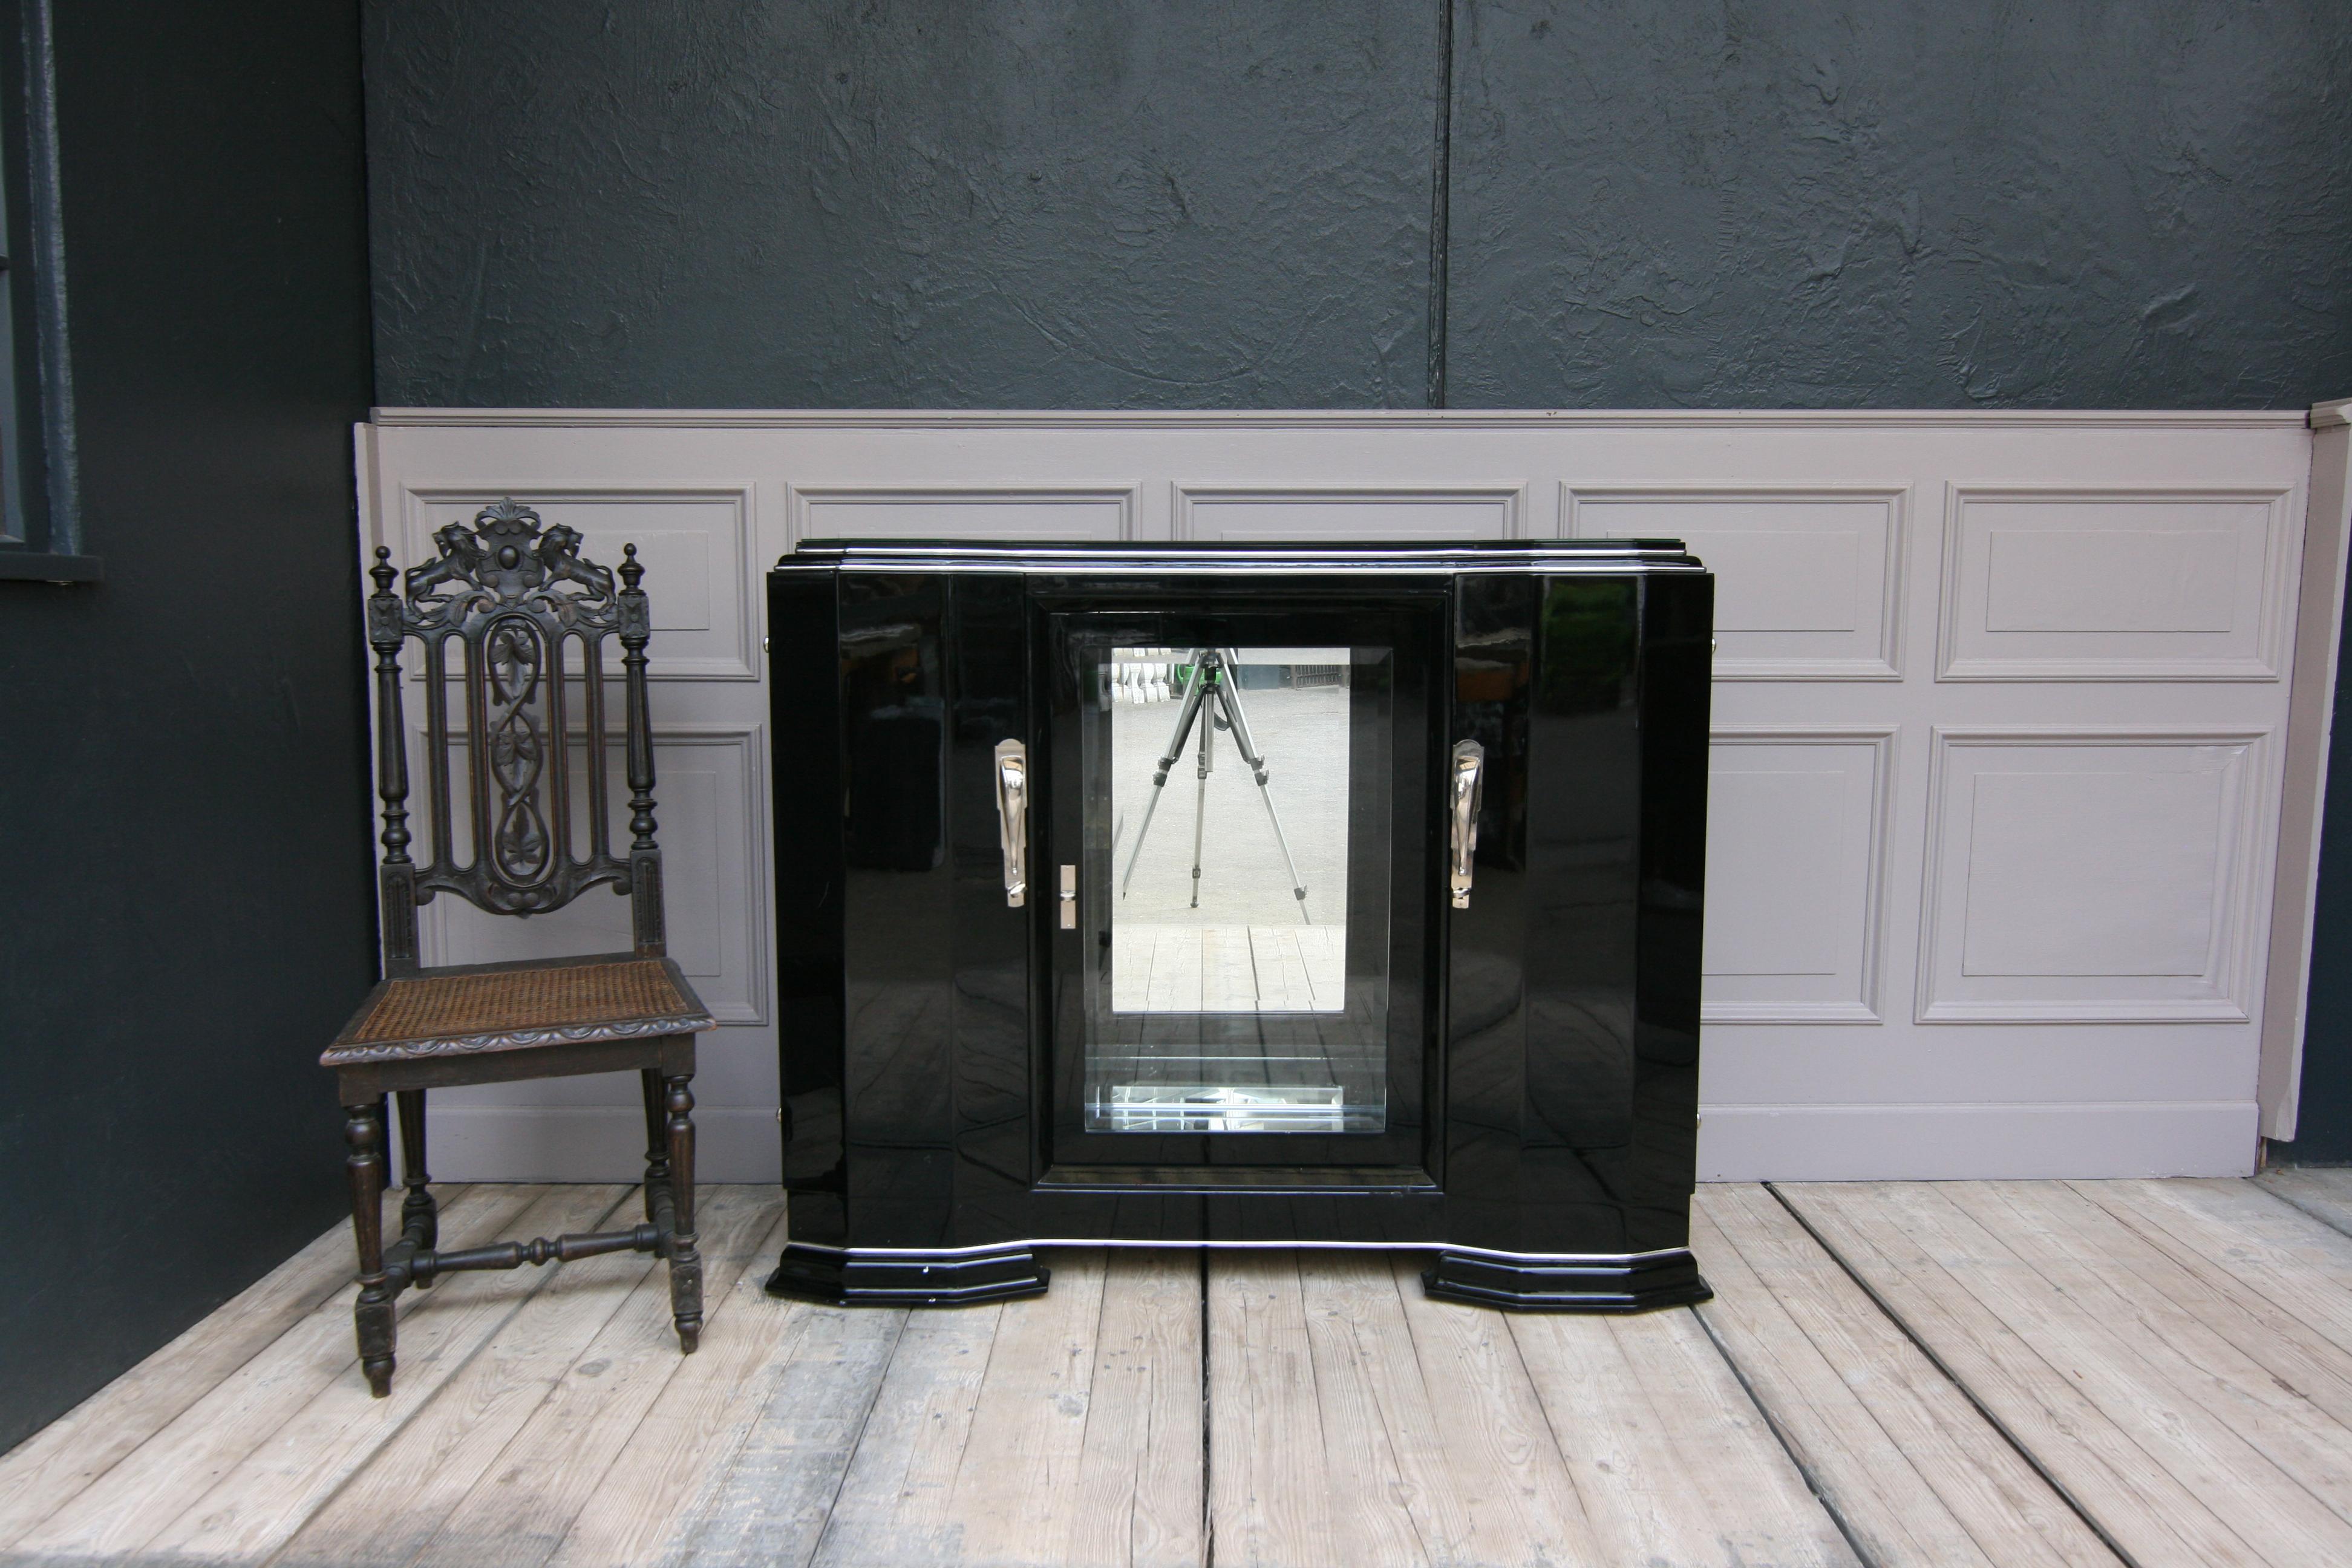 Original Art Deco sideboard from France in black high gloss, unrestored.
Left side and right side, each with a door with a shelf behind it. In the middle is a glass door with faceted cut glass. Mirrored behind, rear wall and floor. 2 glass